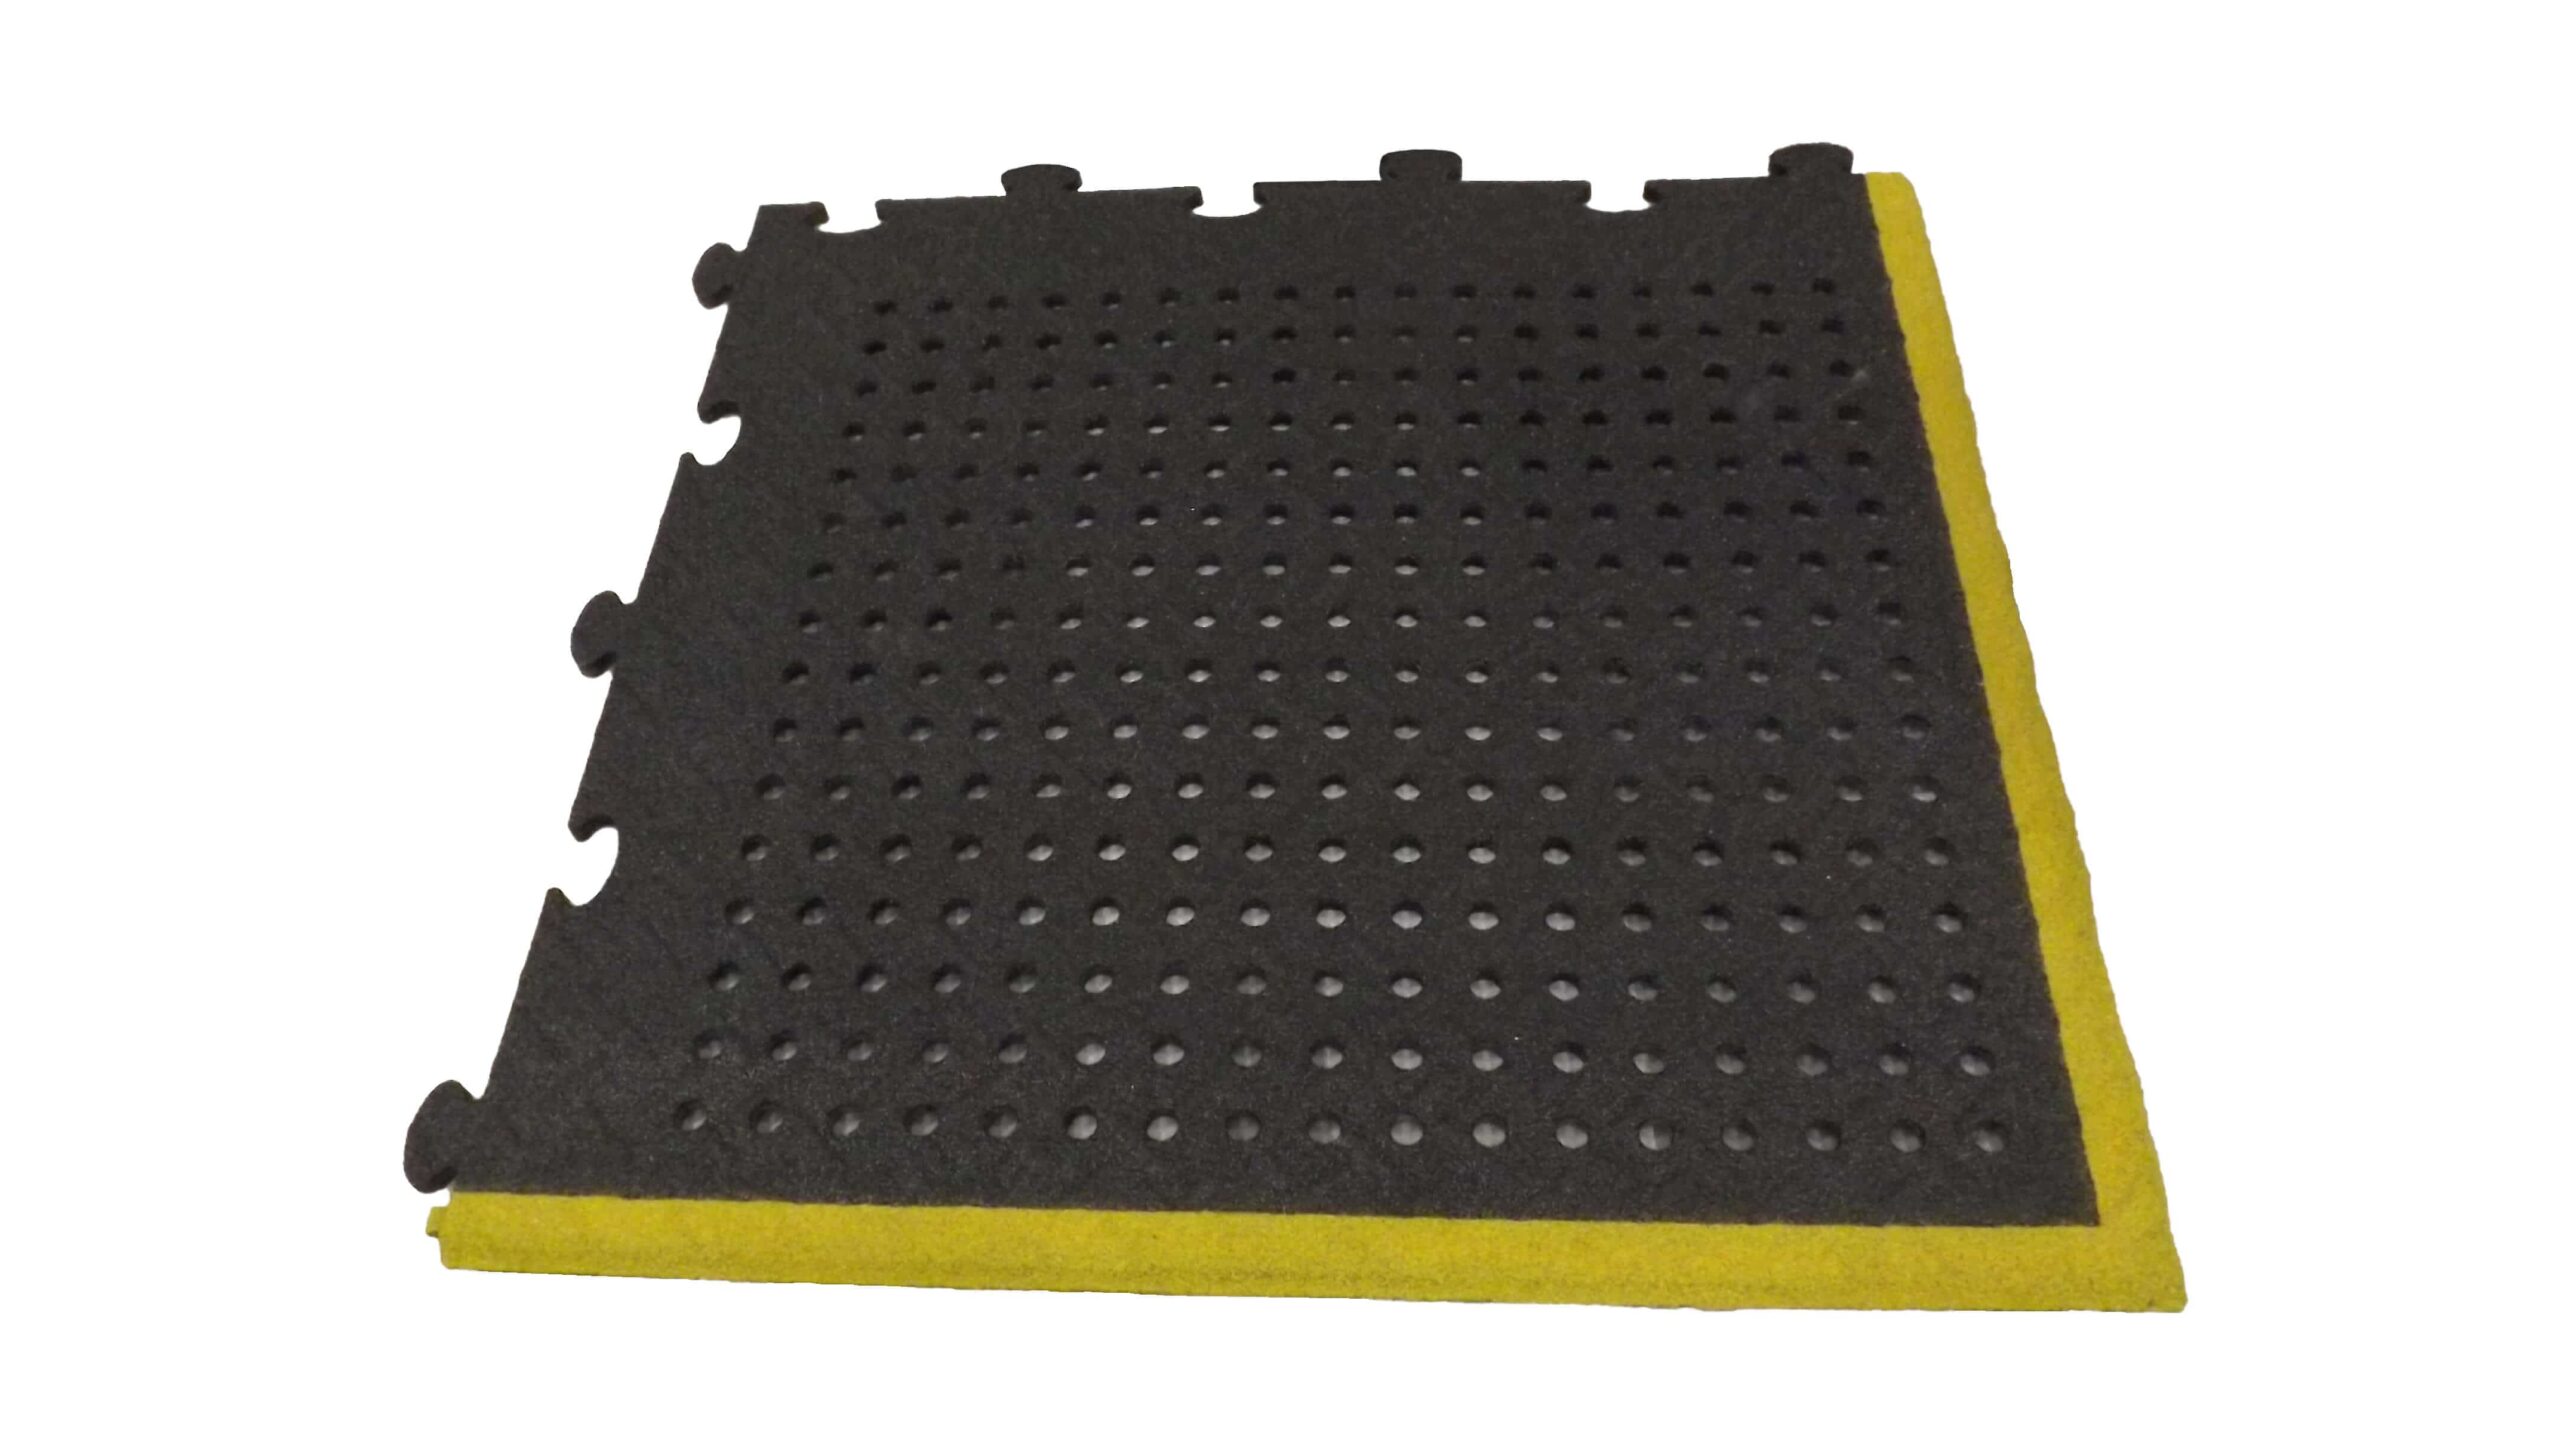 Heavyweight two tone yellow black industrial mat